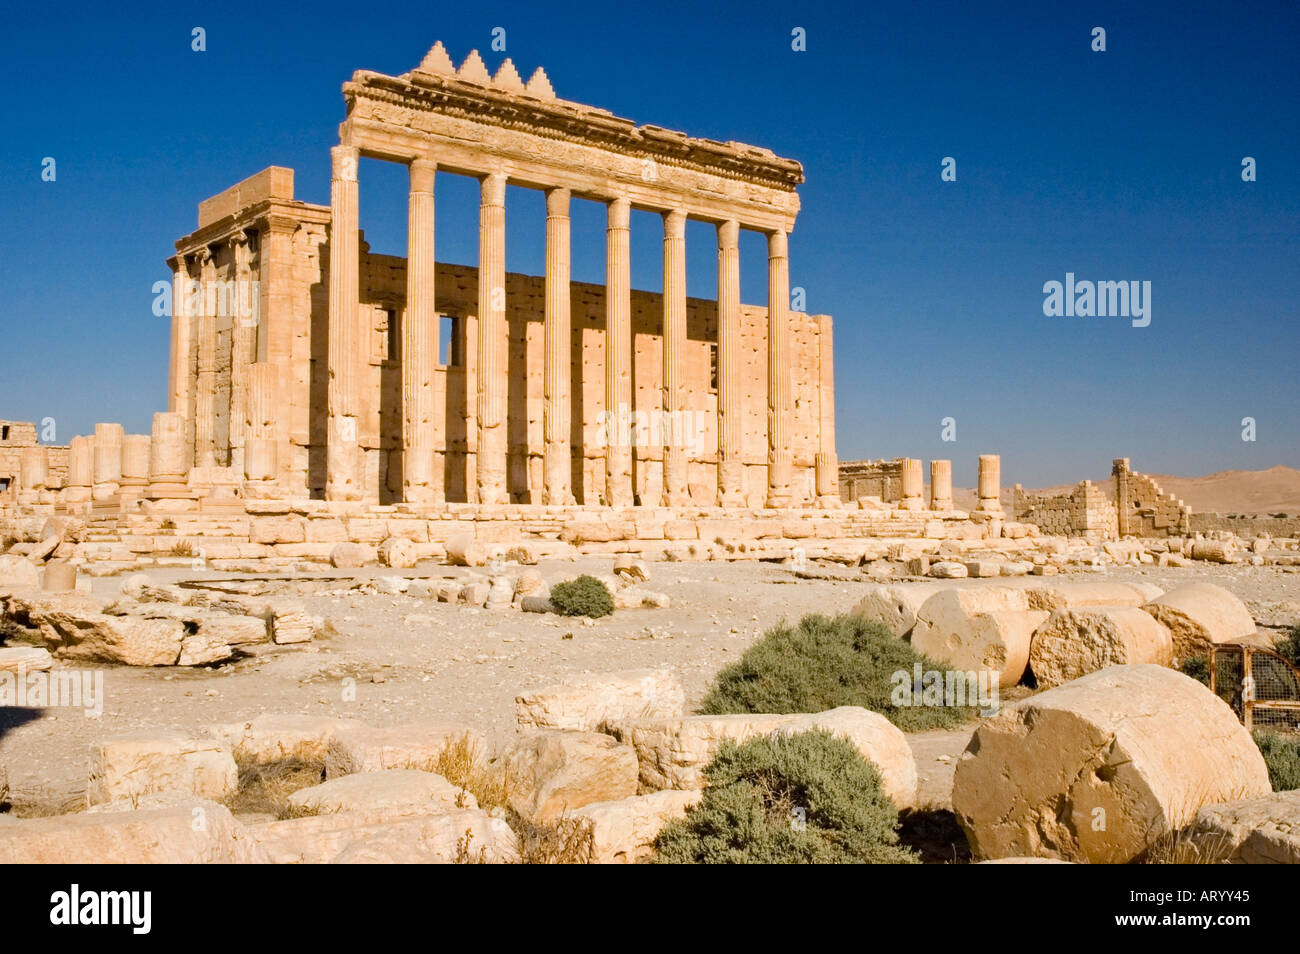 Central cella, Temple of Bel, Bal, amongst Ruins ancient Tadmor, Palmyra, Central Syria, Middle East. DSC 5929 Stock Photo